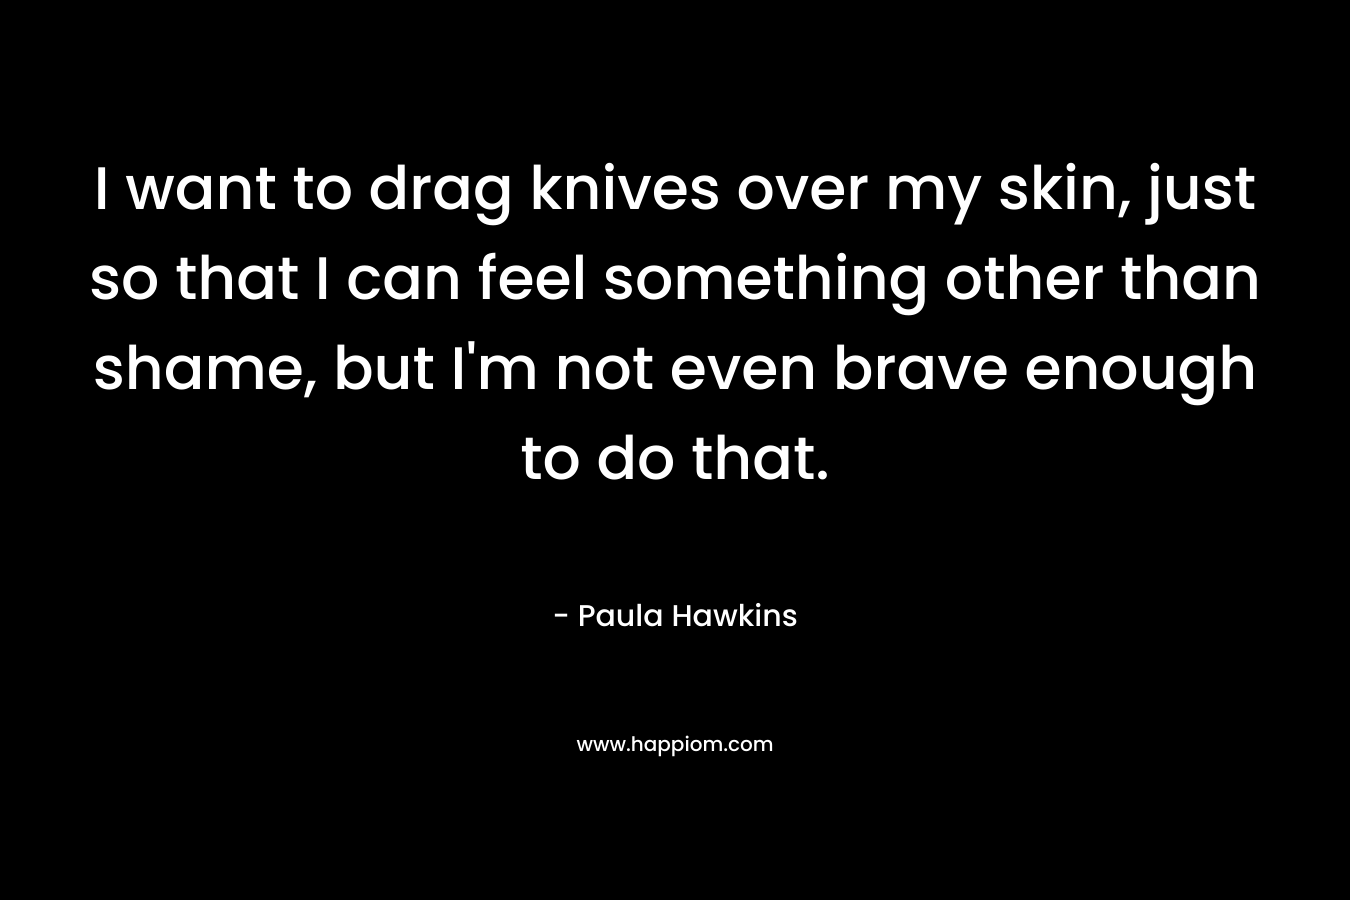 I want to drag knives over my skin, just so that I can feel something other than shame, but I’m not even brave enough to do that. – Paula Hawkins